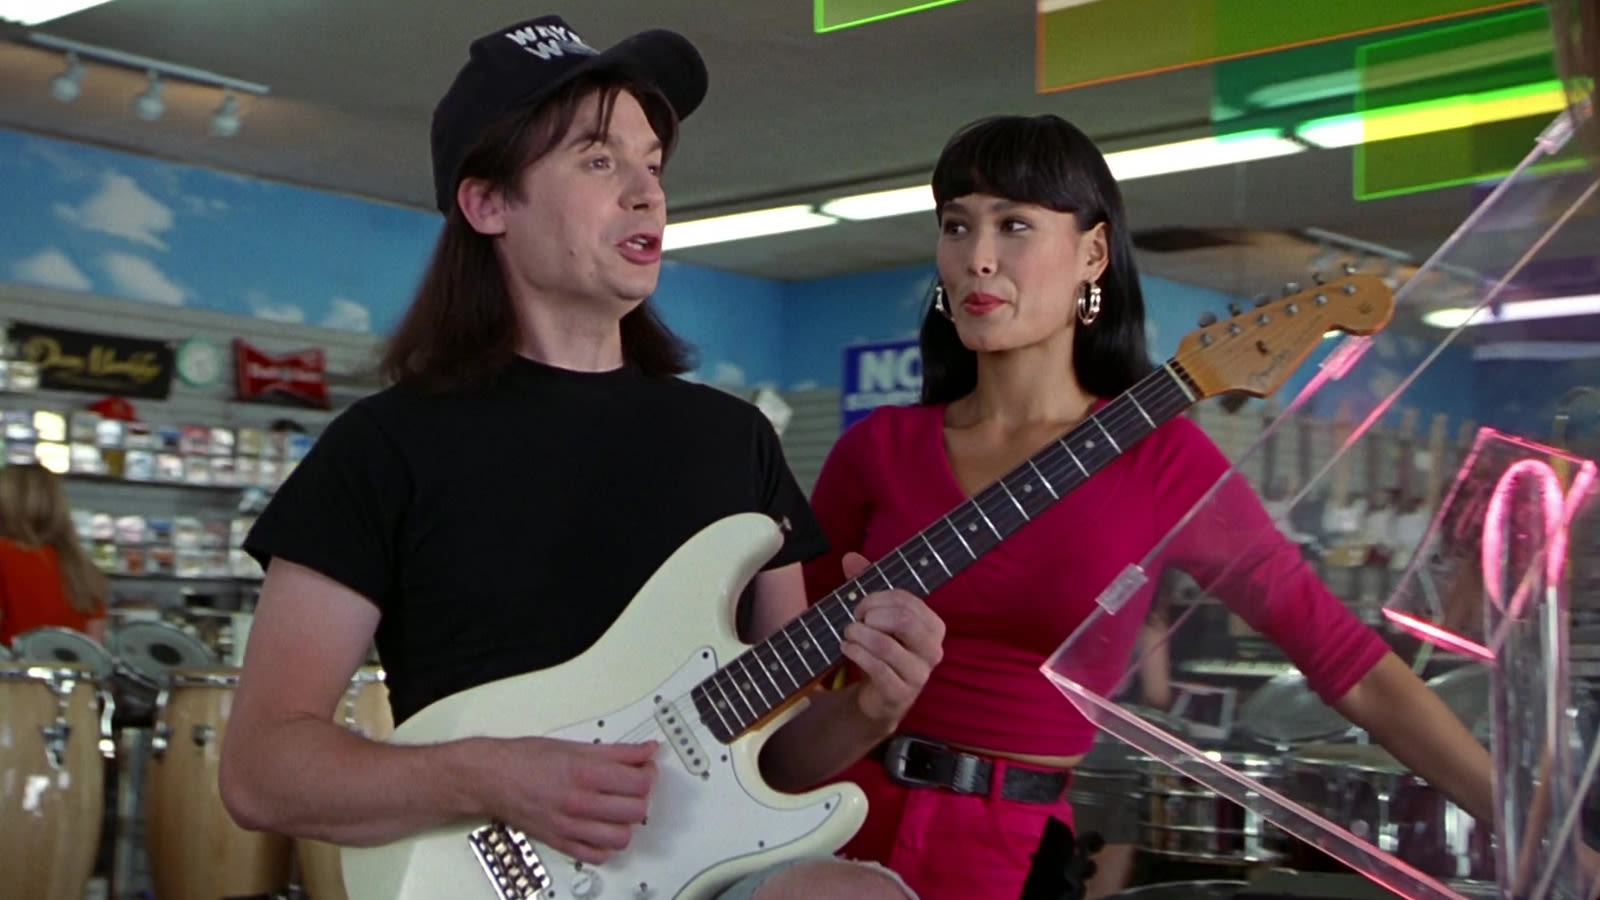 Paramount Set A Strict Rule For The Led Zeppelin Reference In Wayne's World - SlashFilm